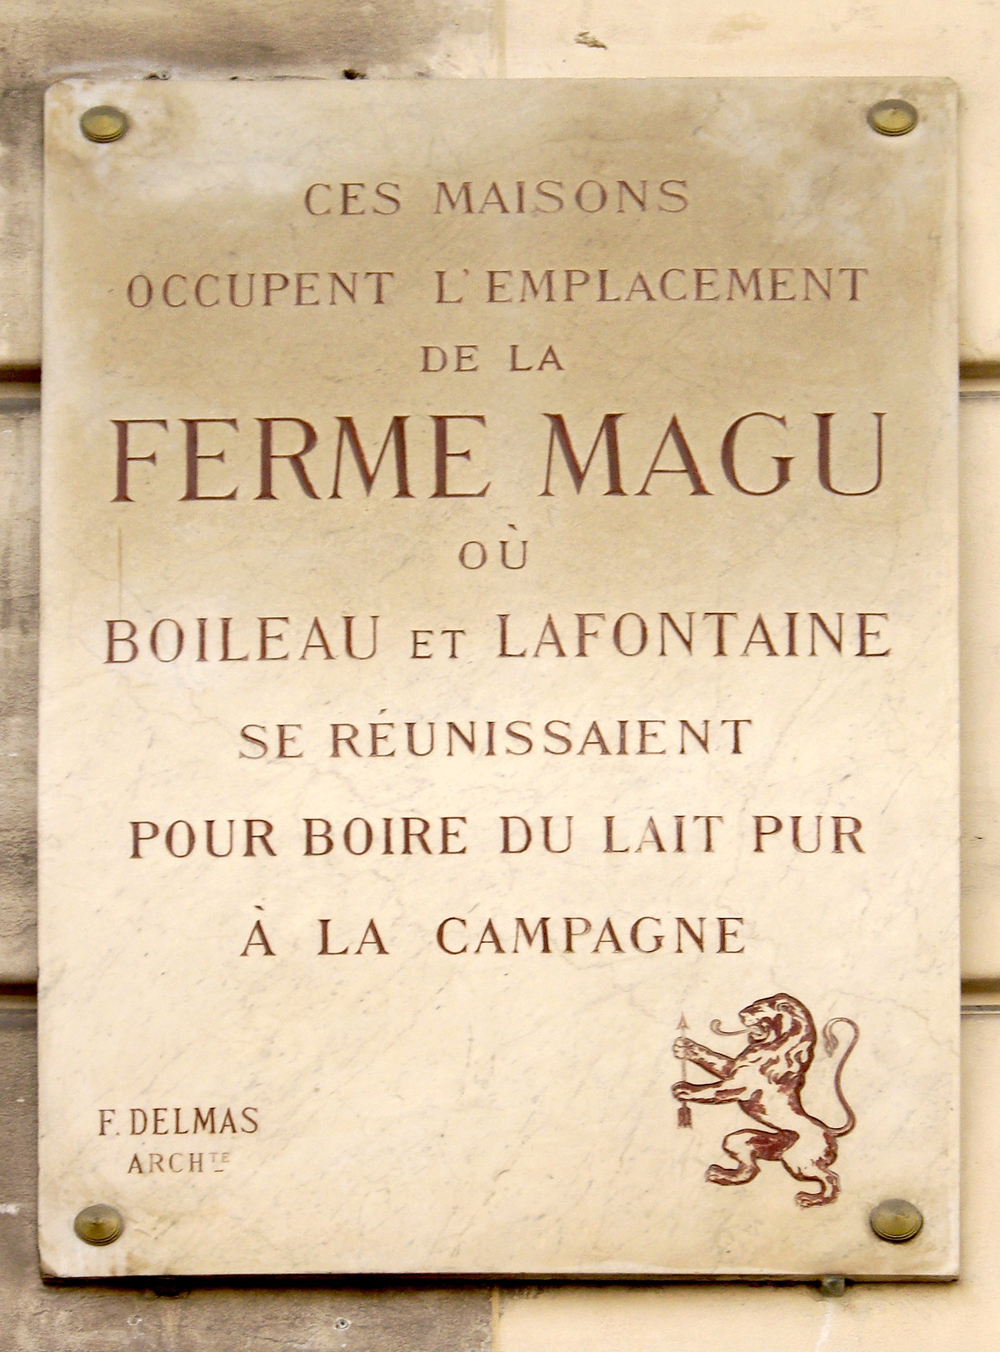 Magu Farm at 9 Place de Mexico, Paris © Wikimedia Commons / Mu - licence [CC BY-SA 3.0] from Wikimedia Commons